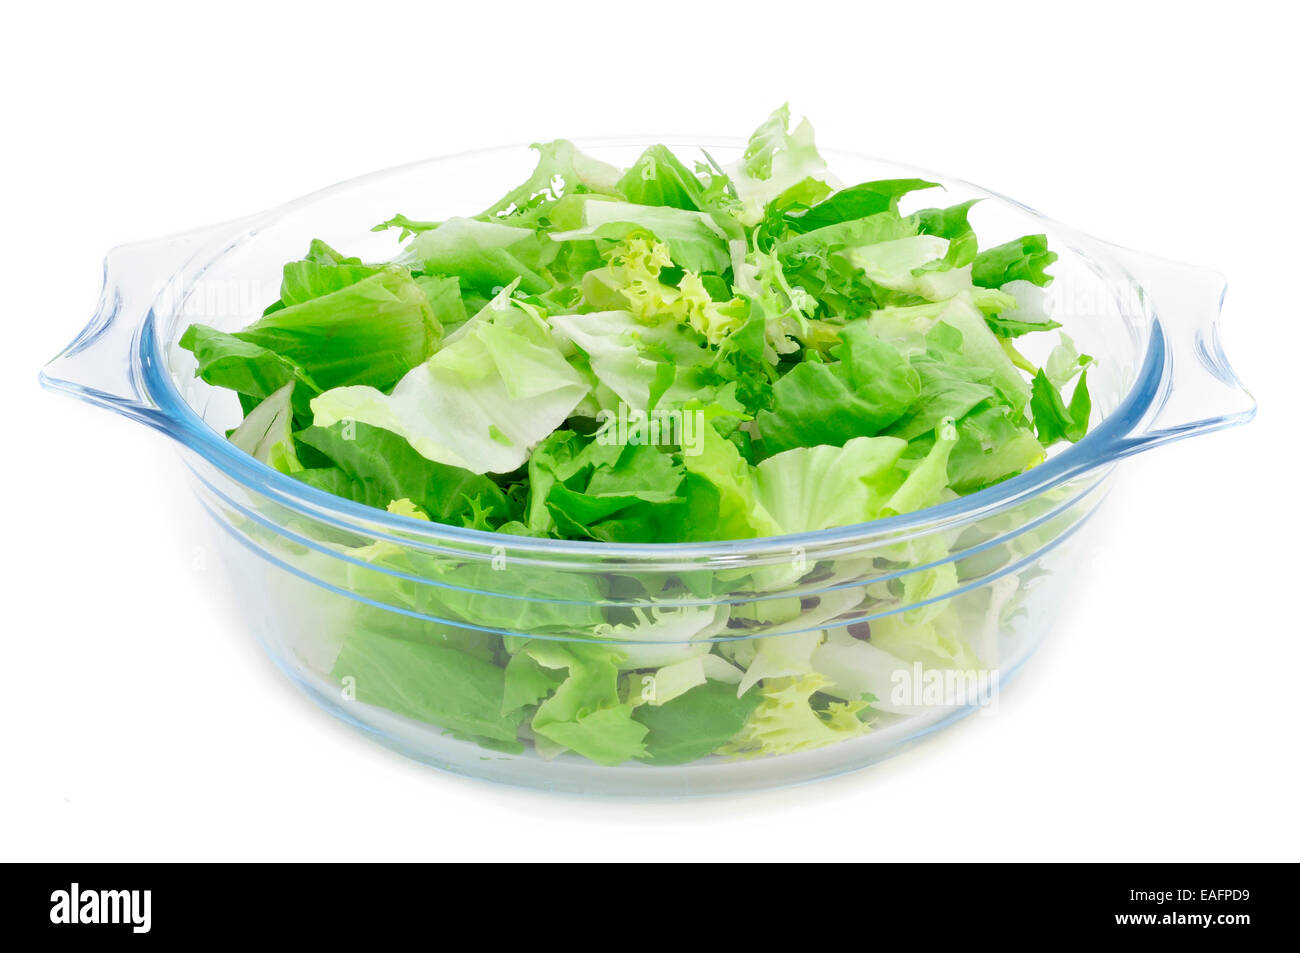 a glass bowl with mesclun, a mix of assorted salad leaves, on a white background Stock Photo